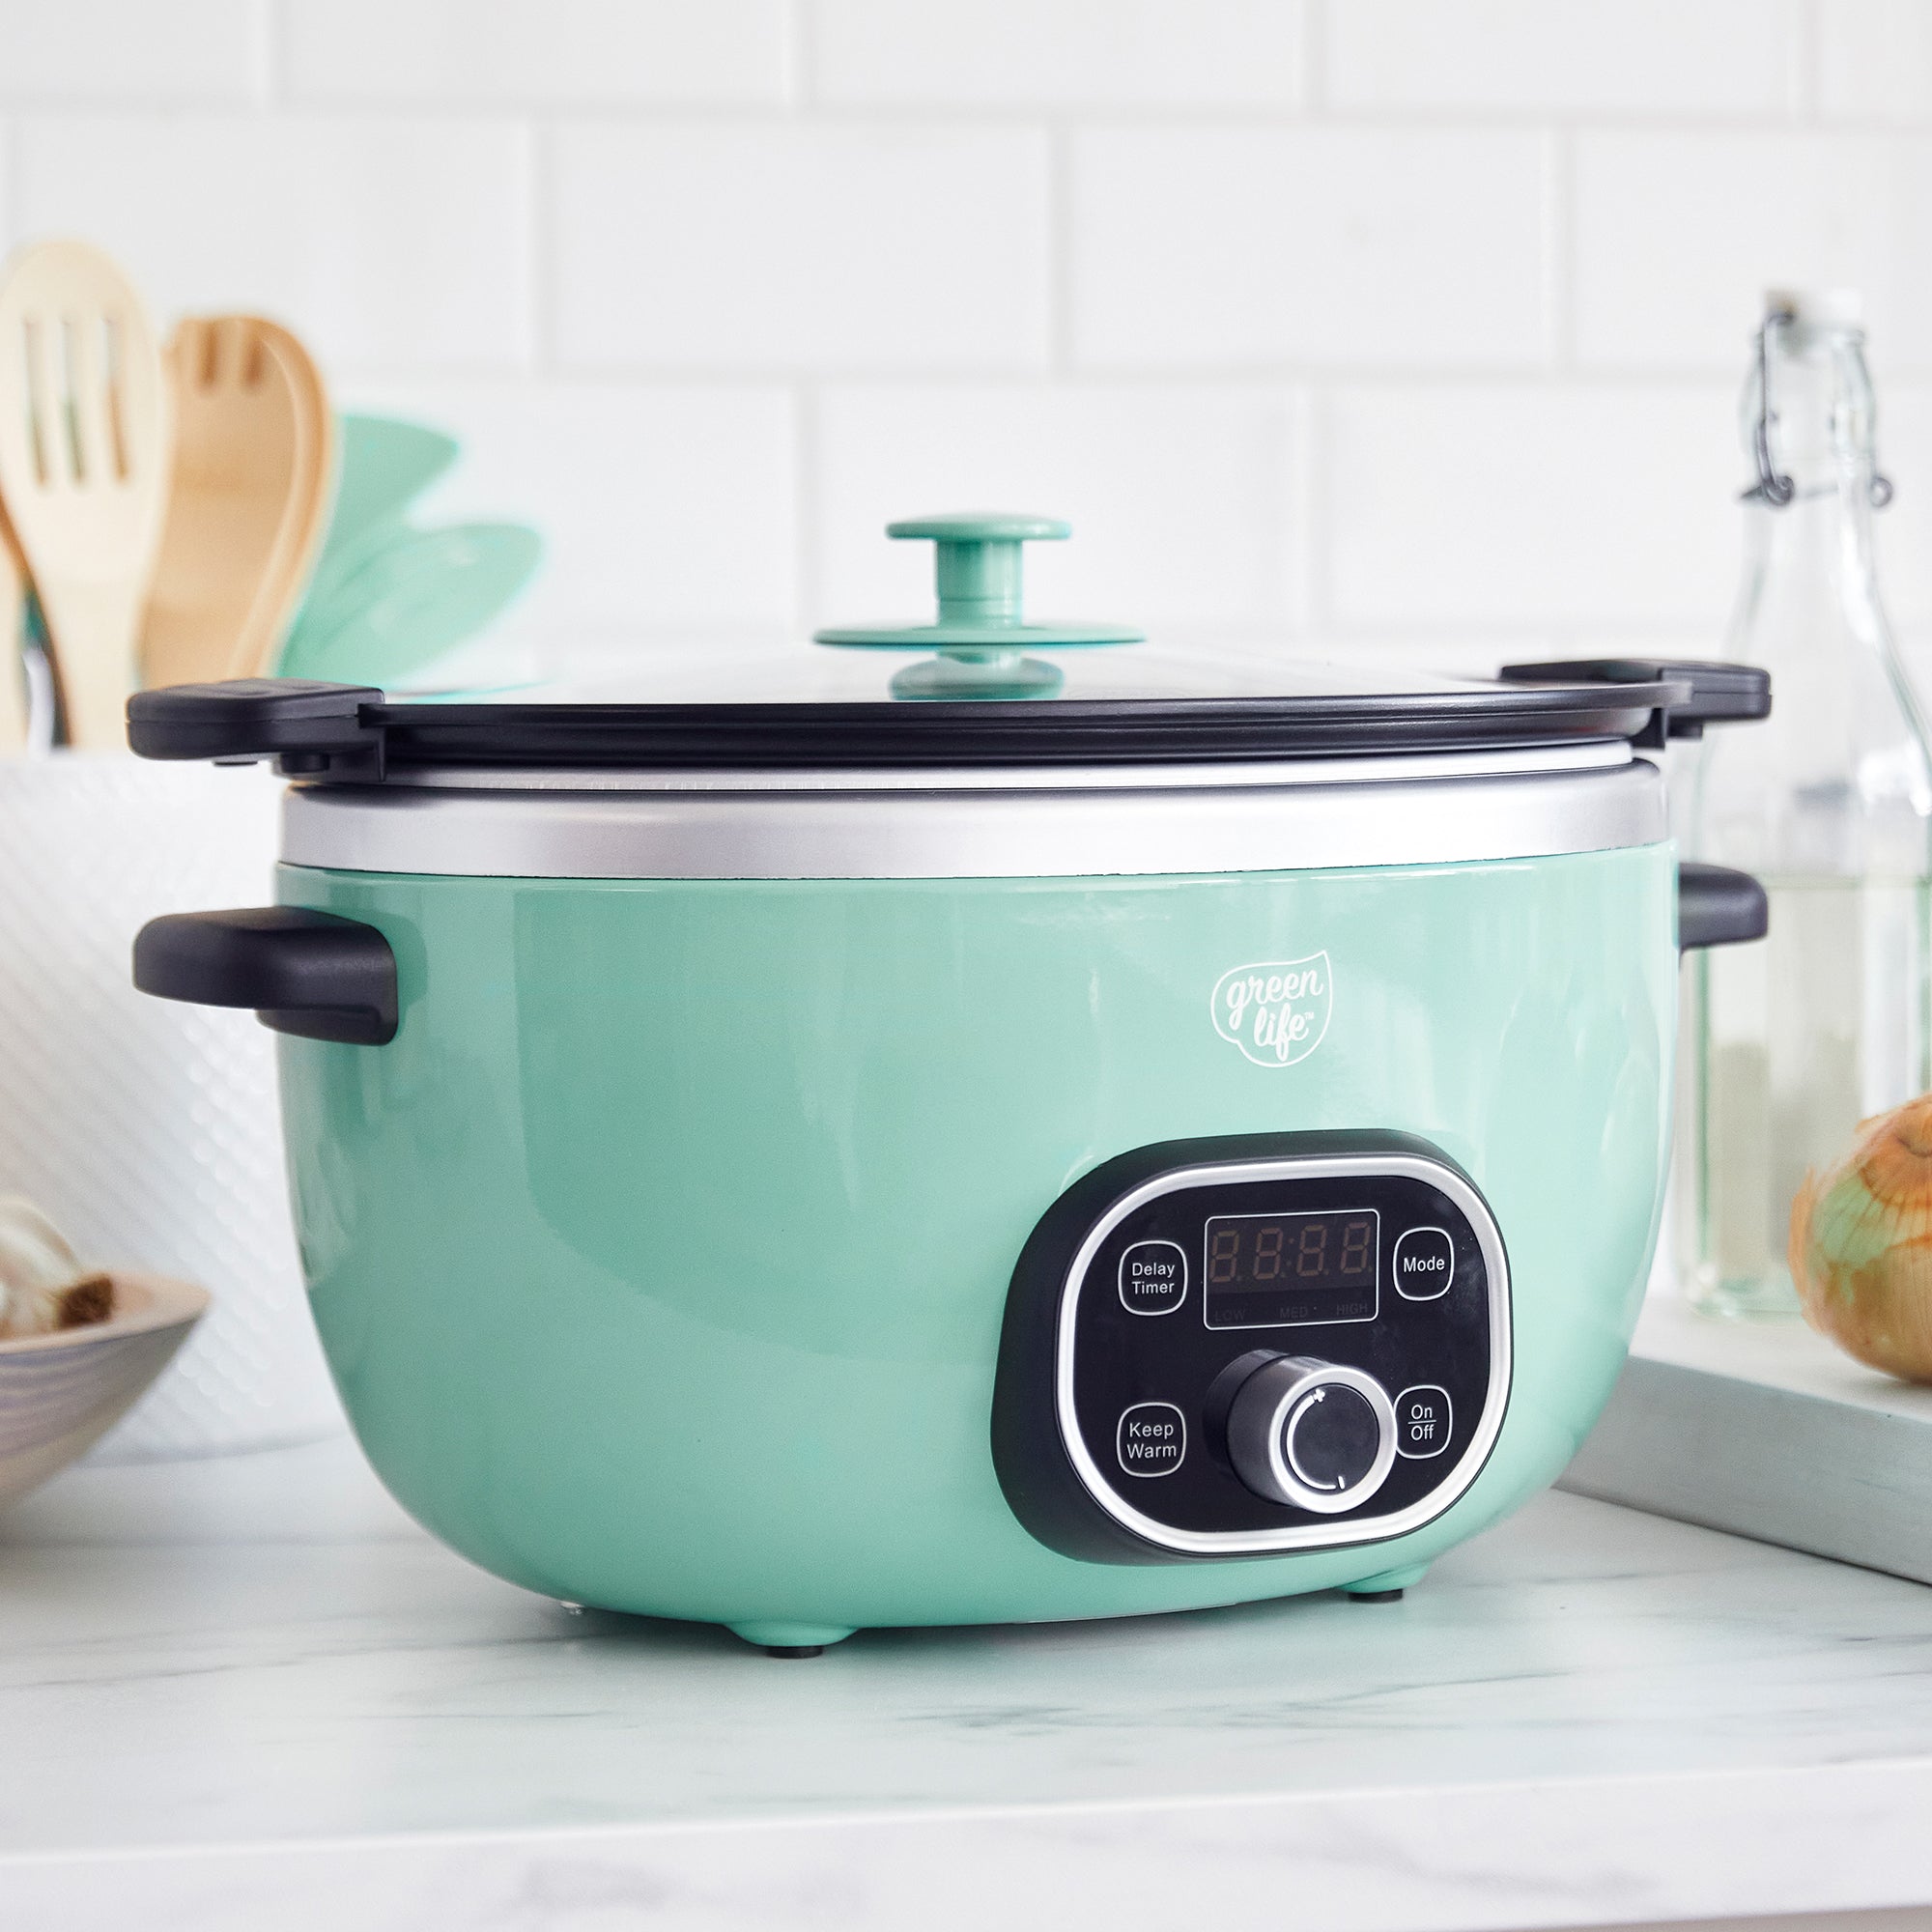 GreenLife Healthy Cook Duo 6qt Nonstick Slow Cooker Turquoise Lid